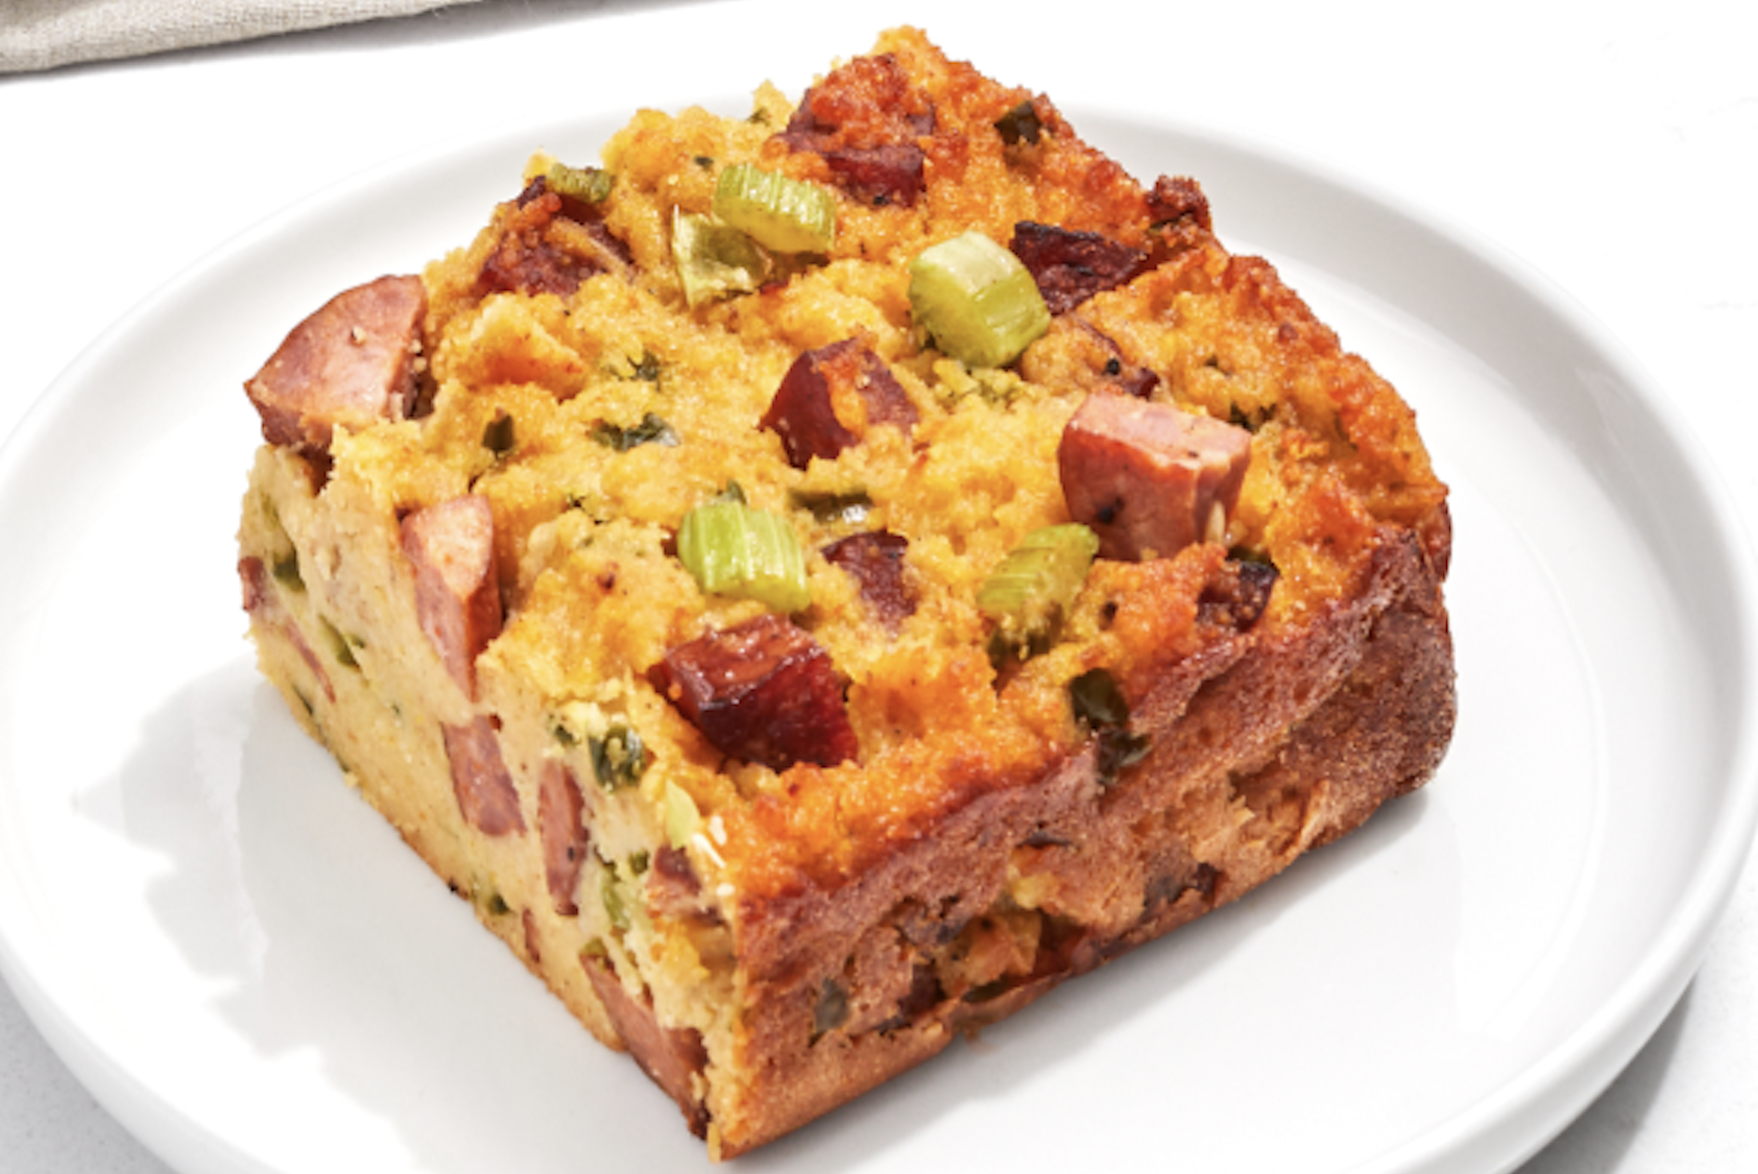 Charlie Mitchell's cornbread and andouille sausage.